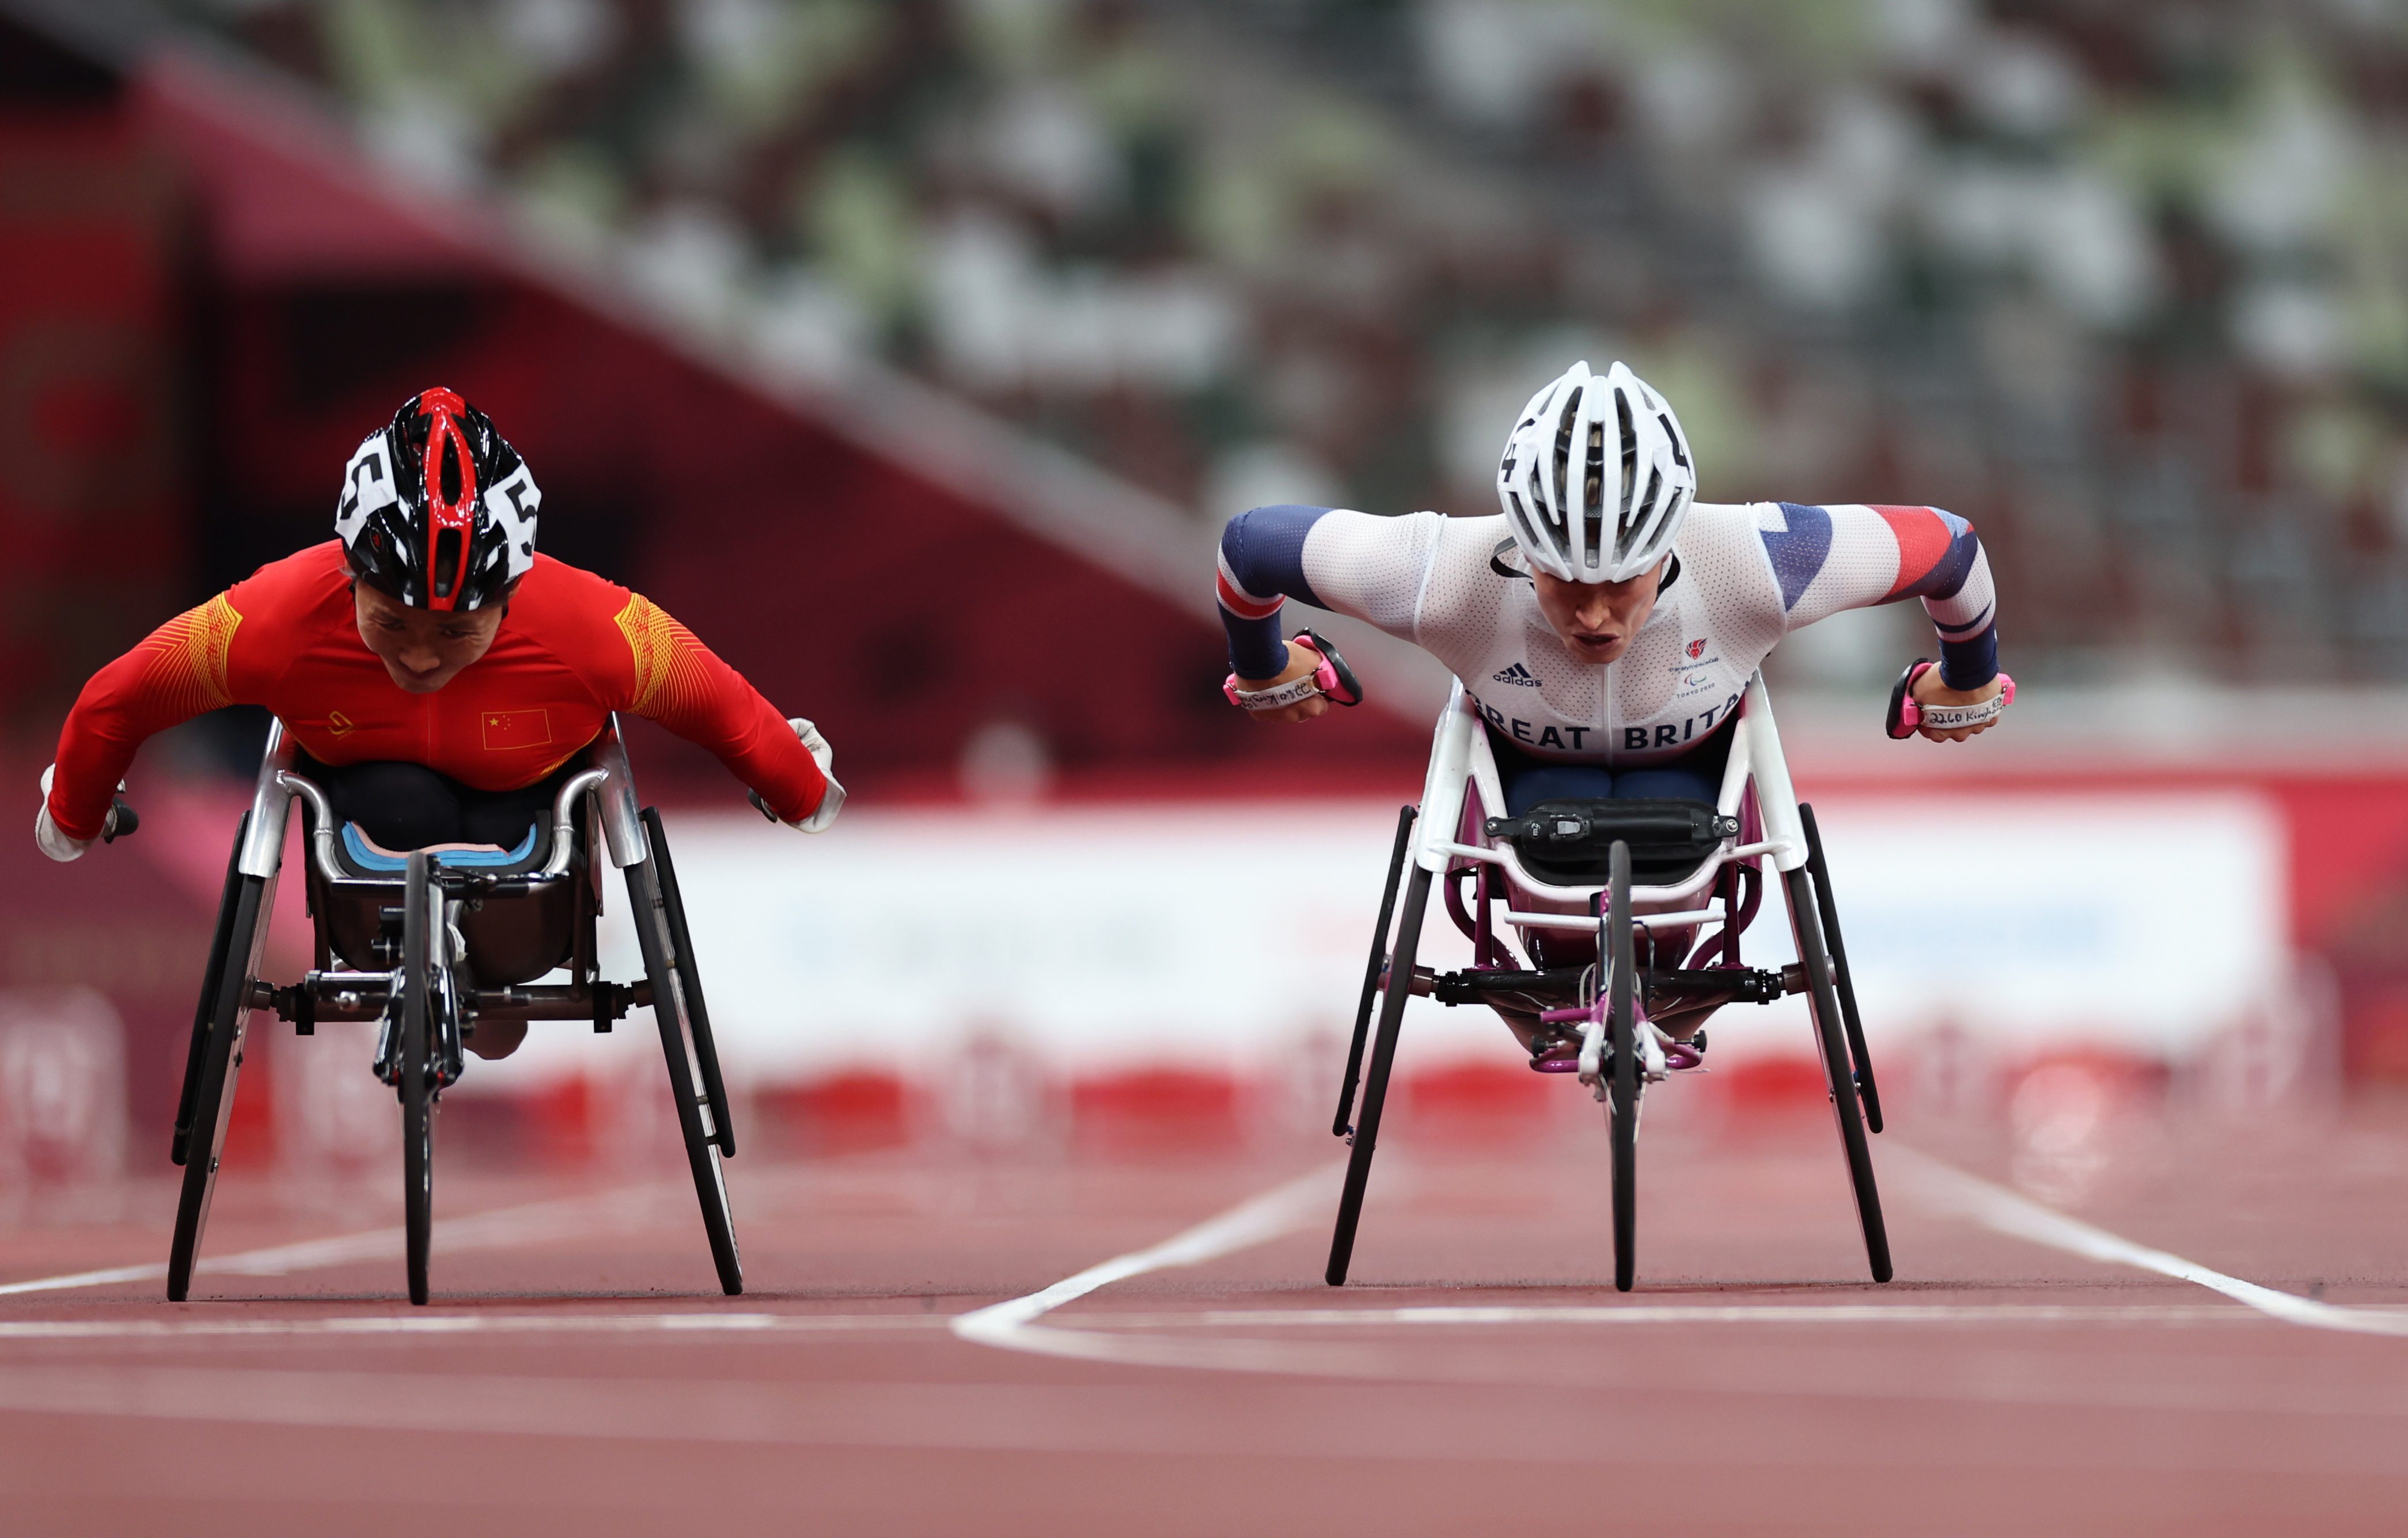 Paralympians still don’t get the kind of media attention they deserve as elite athletes